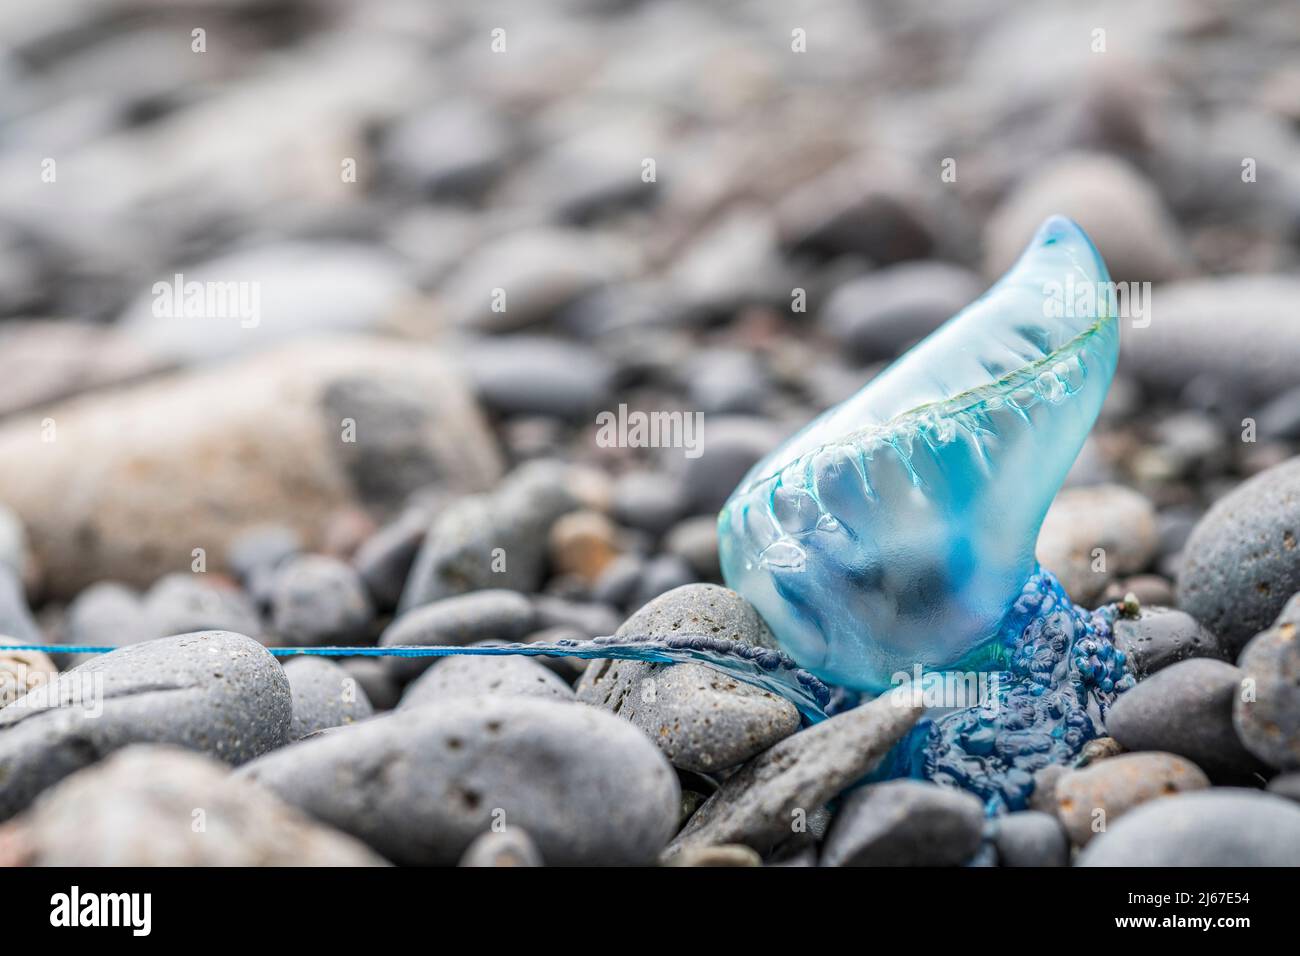 Portuguese man o' war (Physalia physalis), also known as the man-of-war, on a beach. Stock Photo